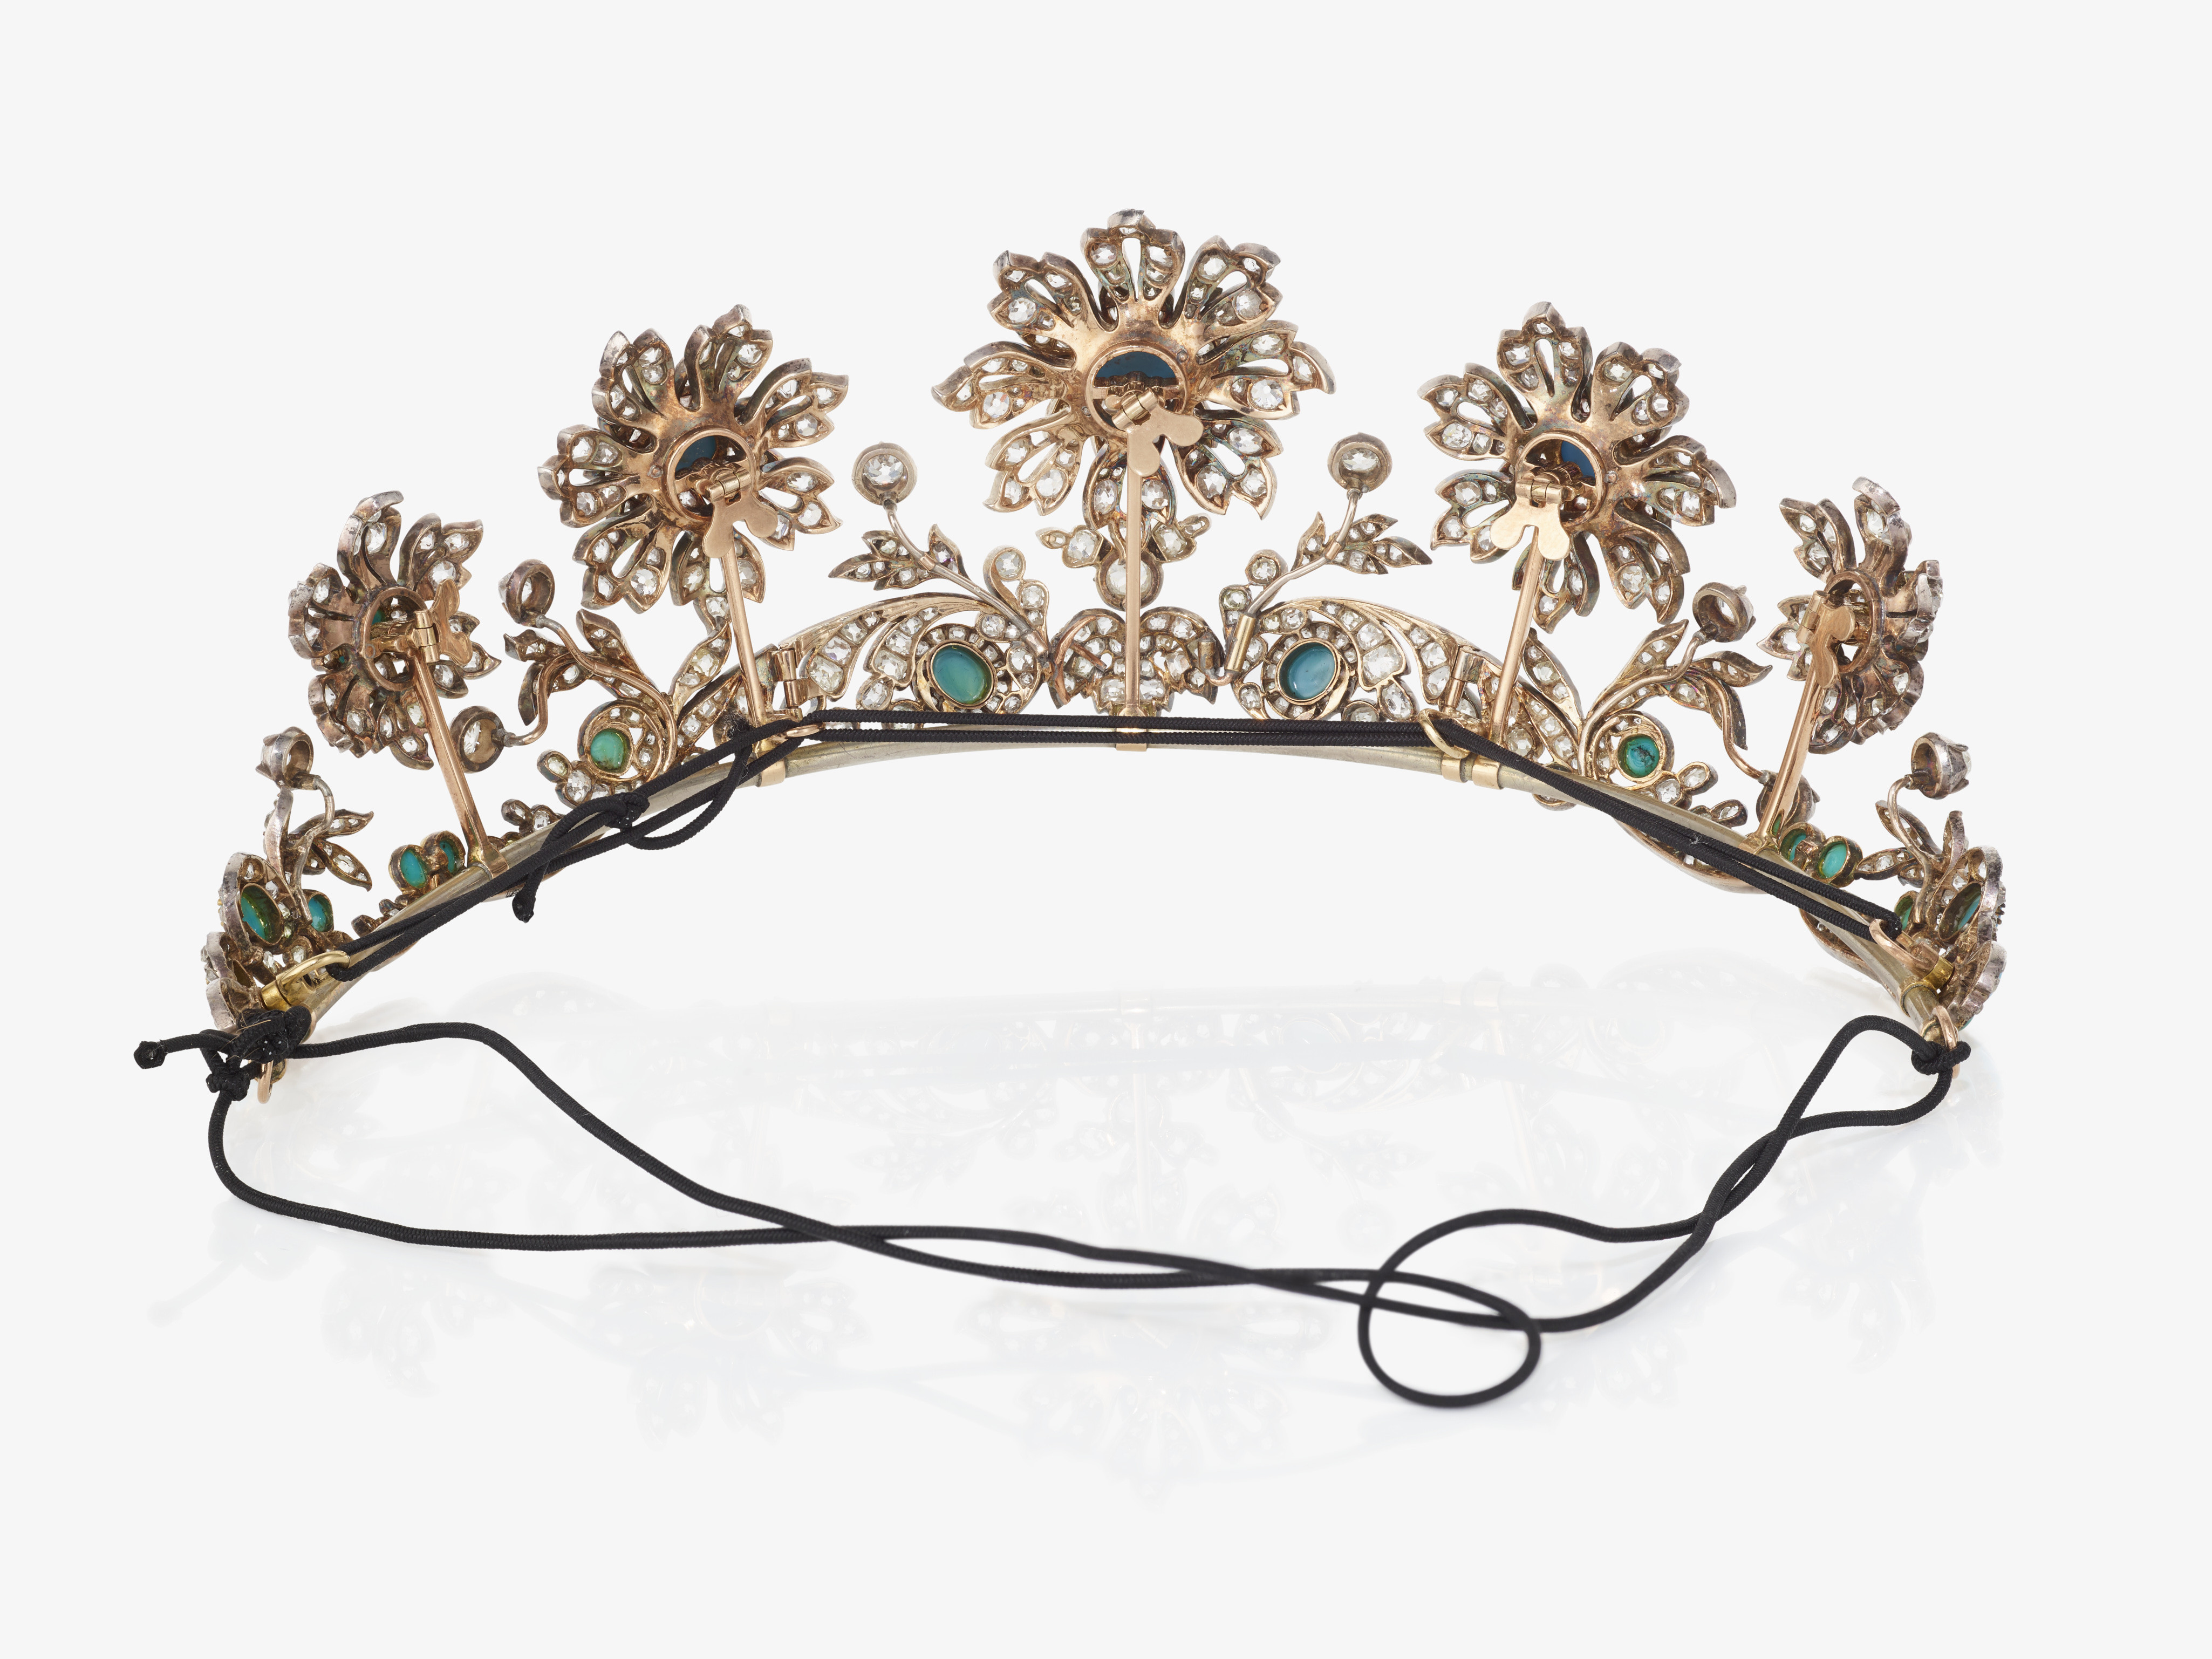 A tiara with turquoise and diamonds - Image 7 of 16